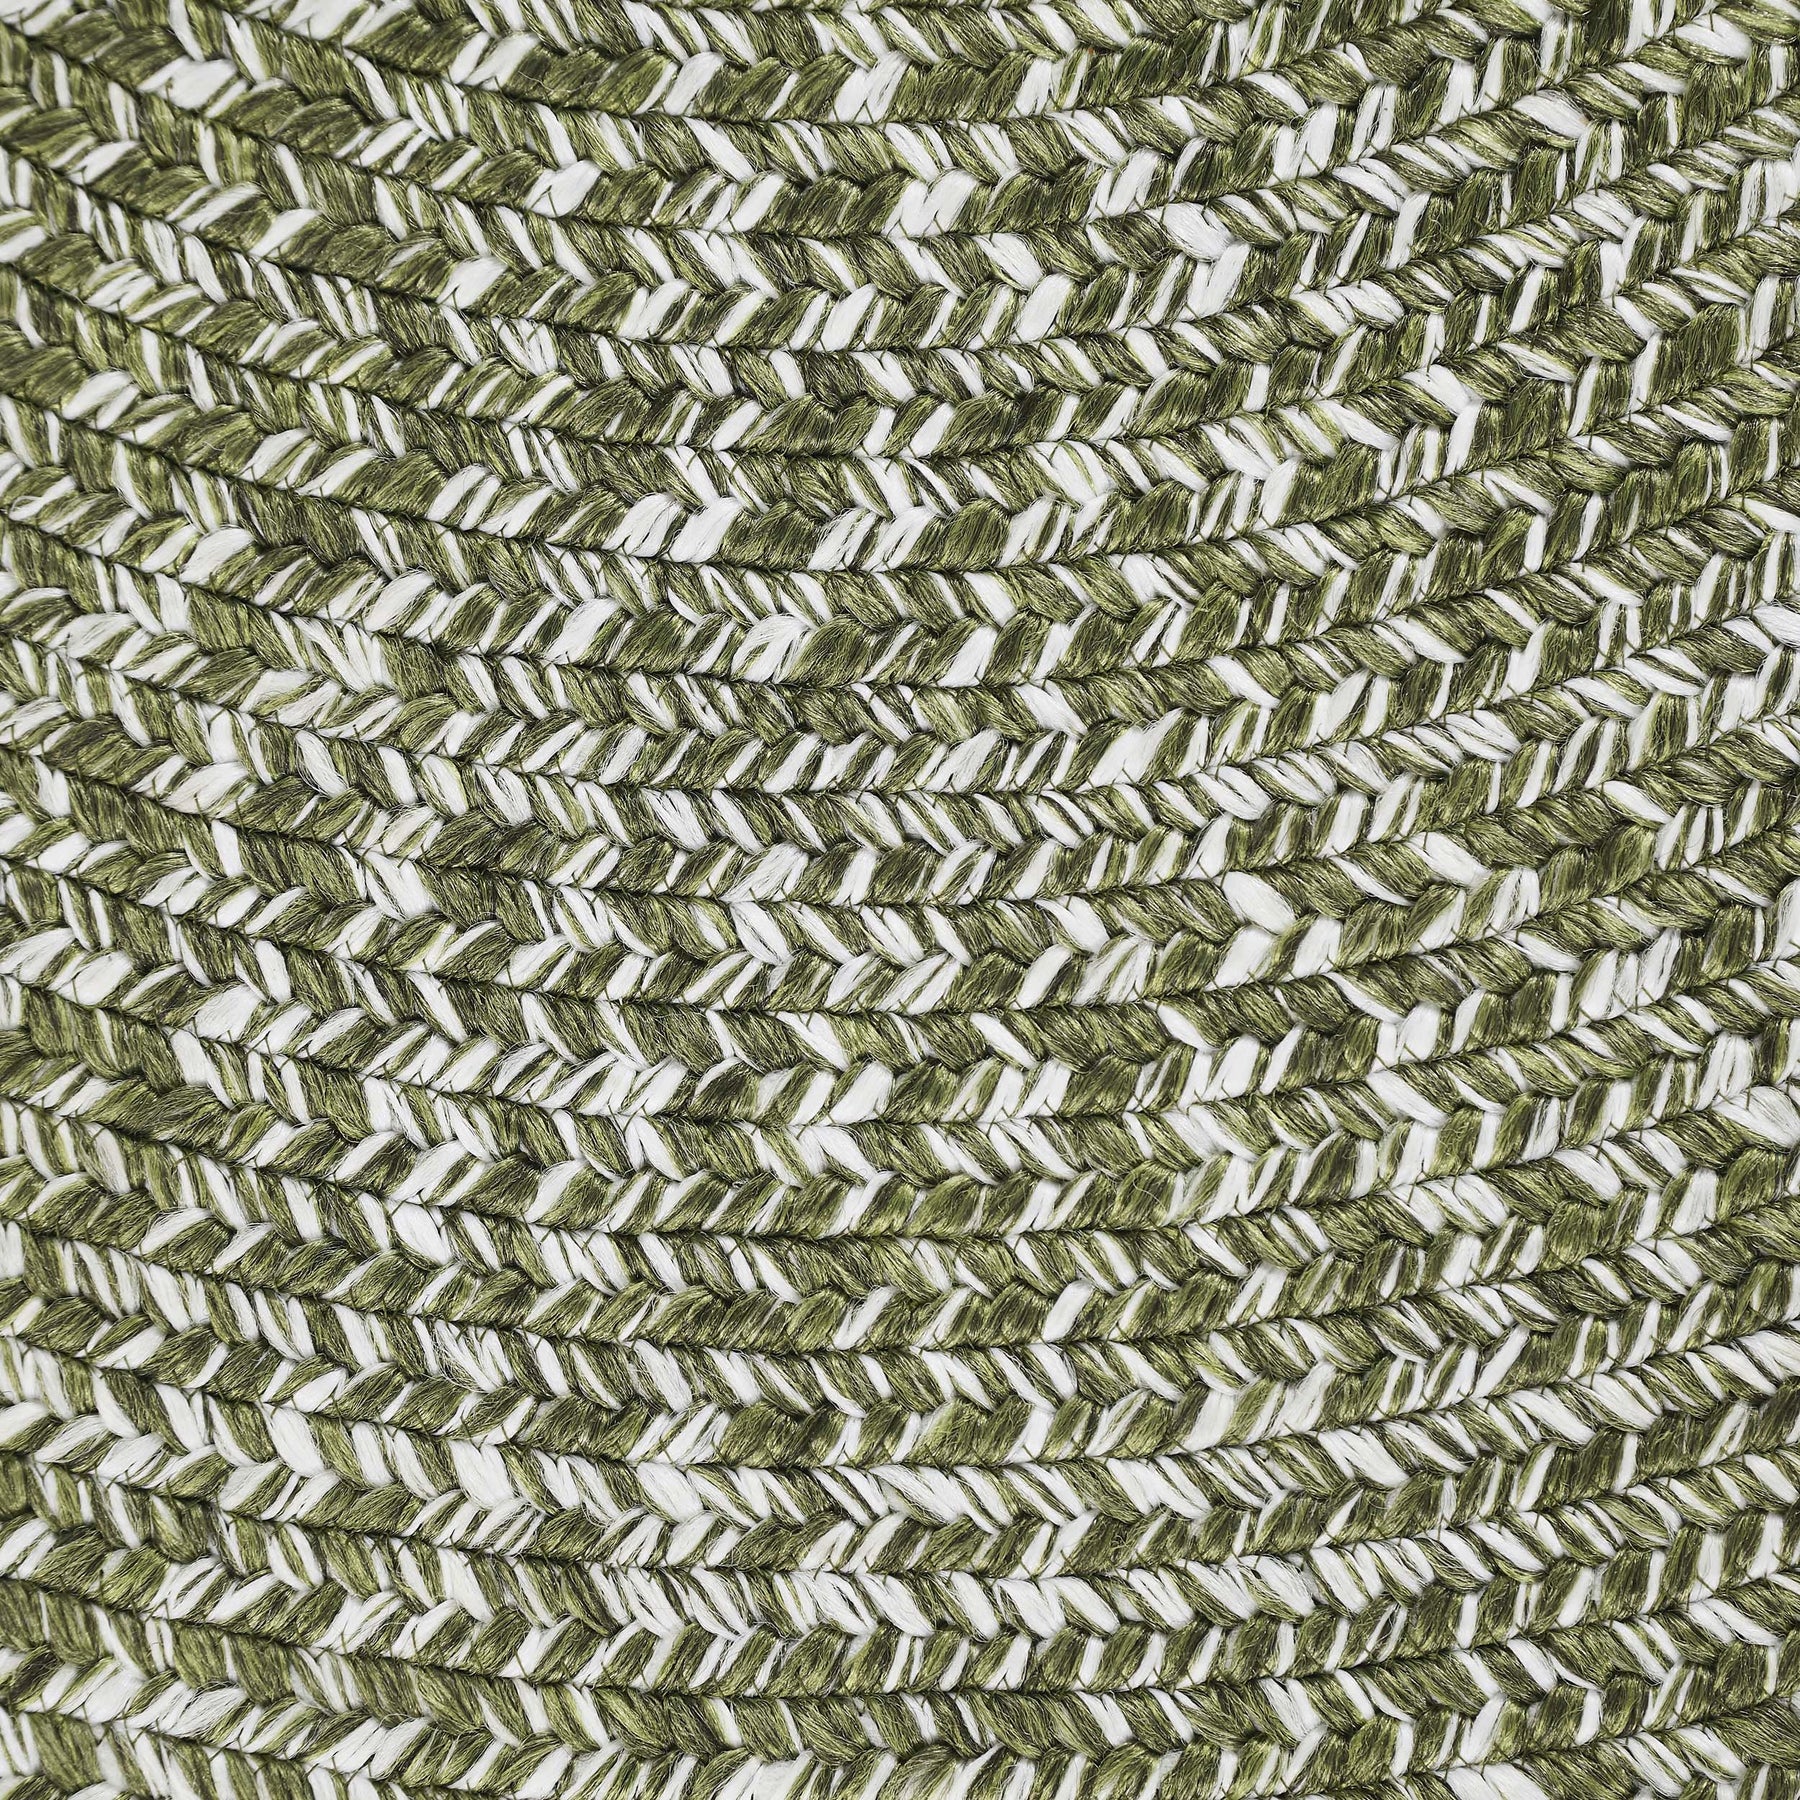 Reversible Braided Eco-Friendly Area Rug Indoor Outdoor Rugs - GreenWhite